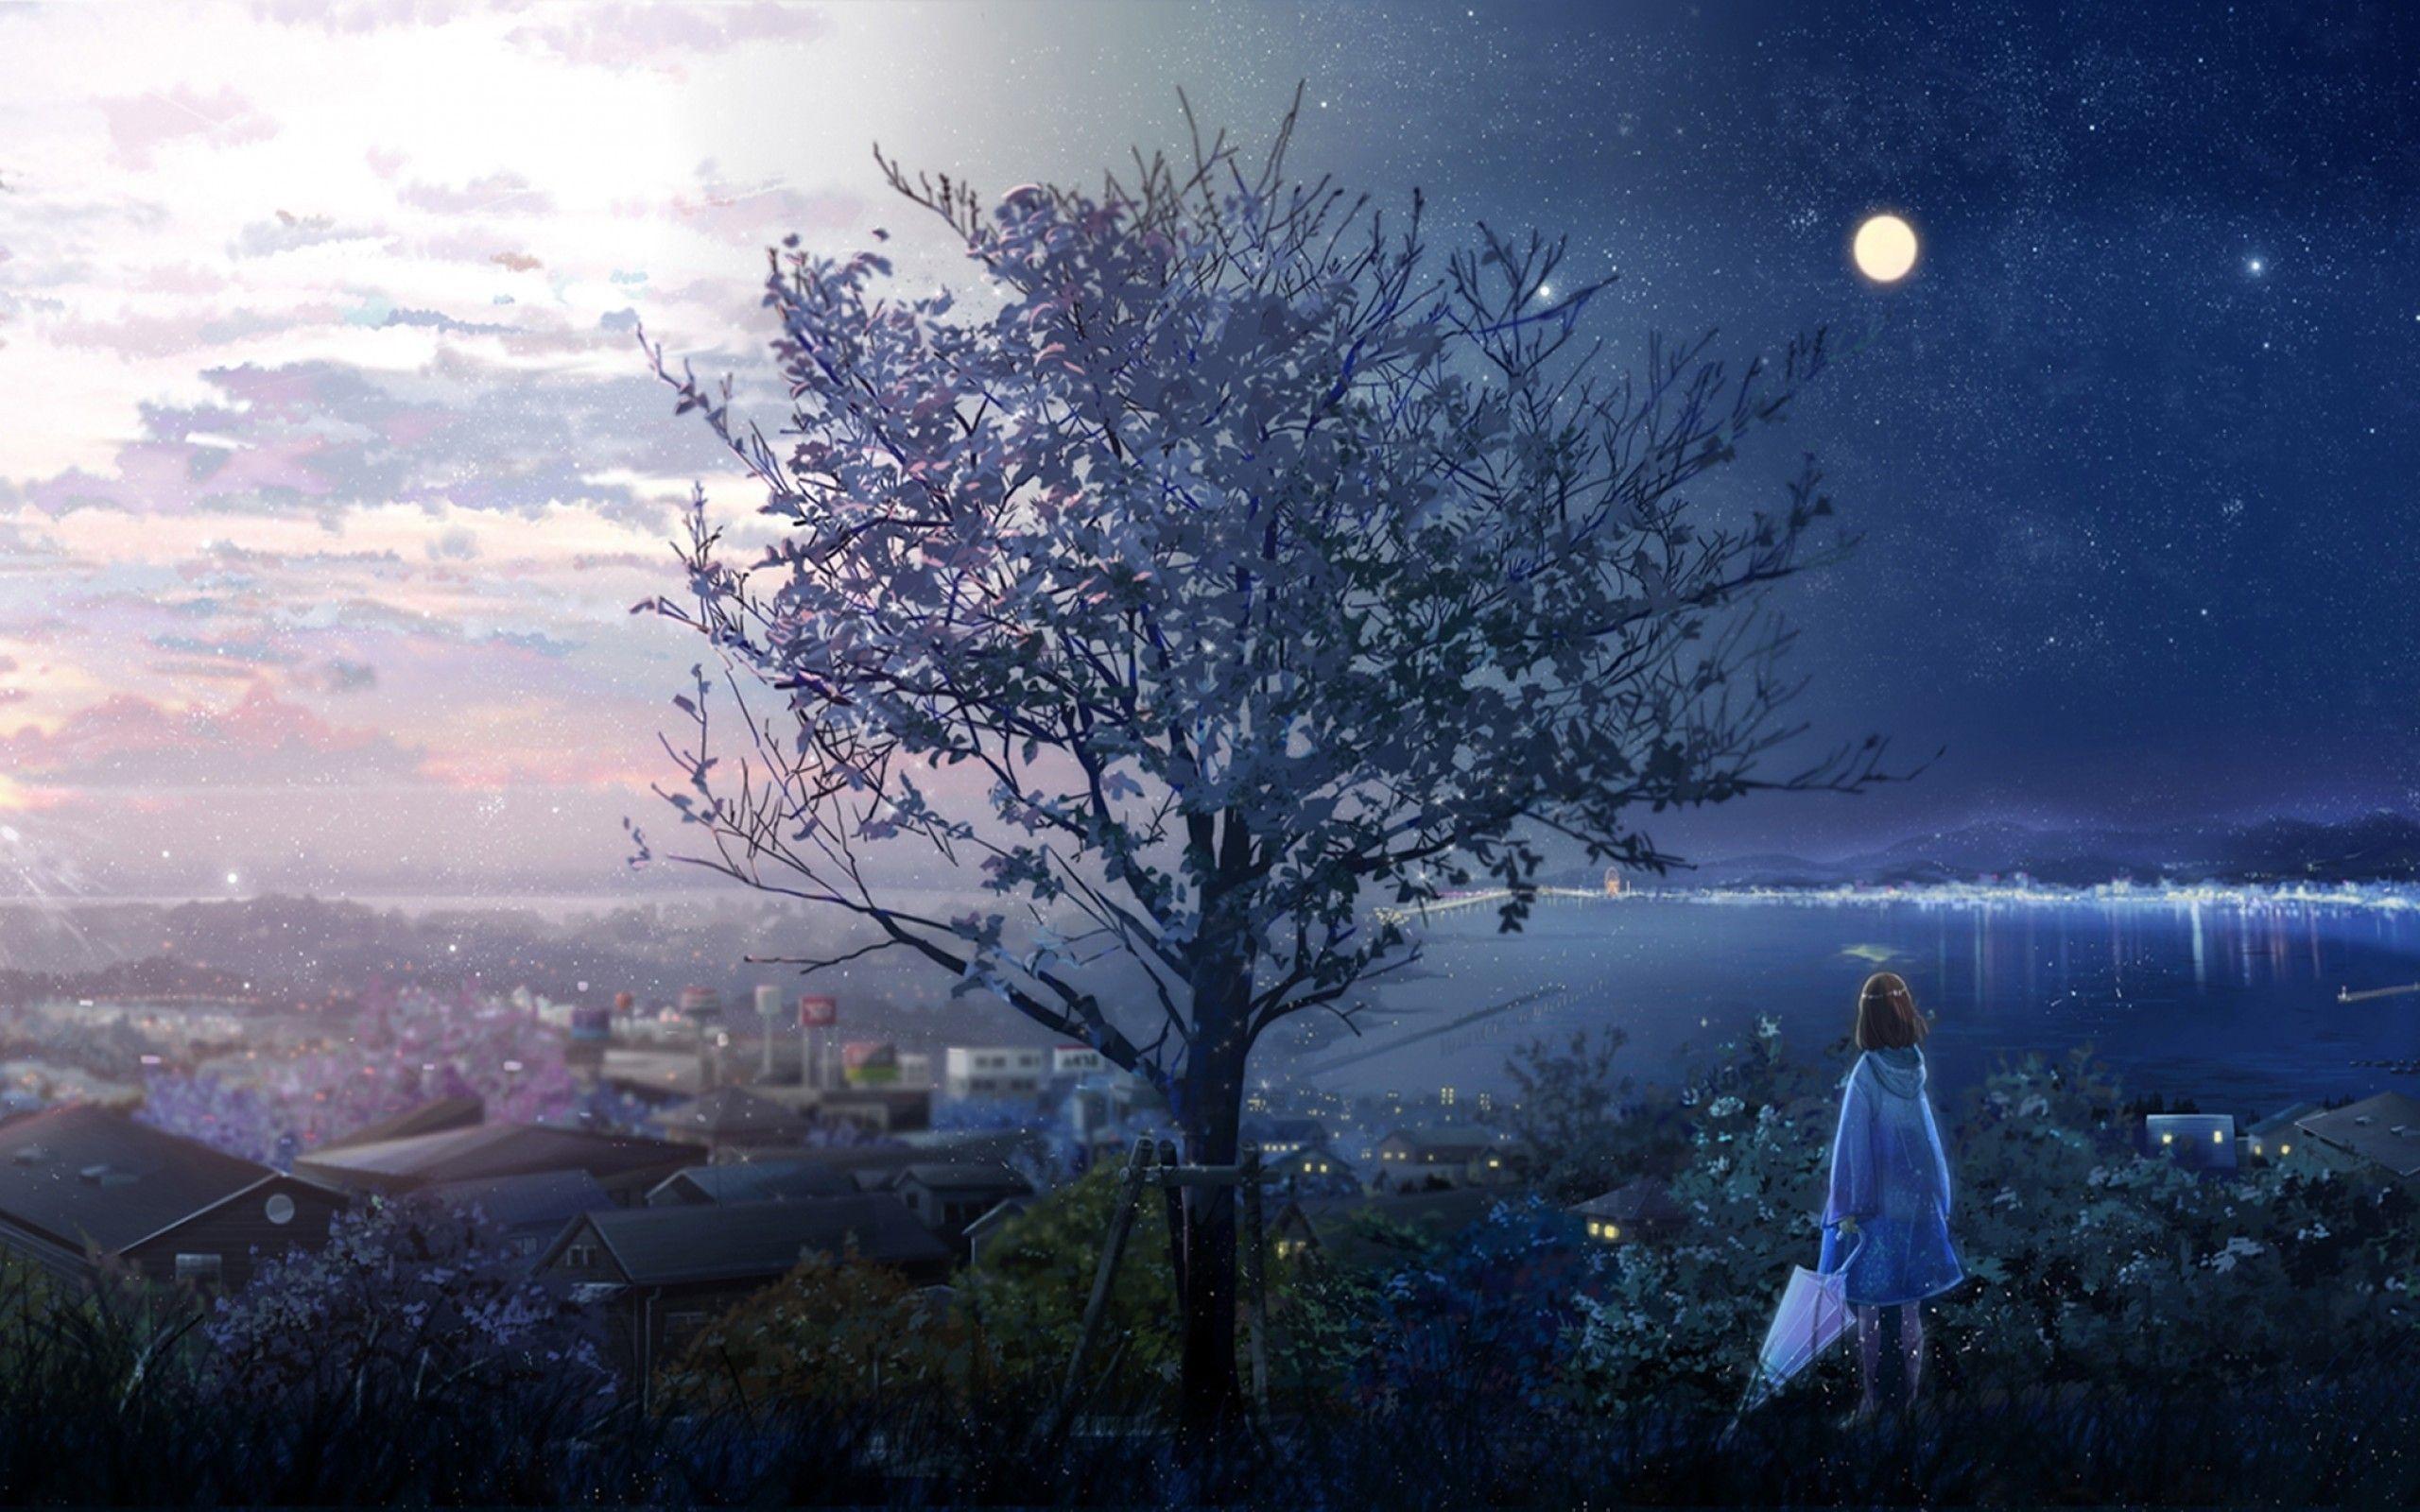 Anime Girl Dream Moon iPad Air Wallpapers Free Download